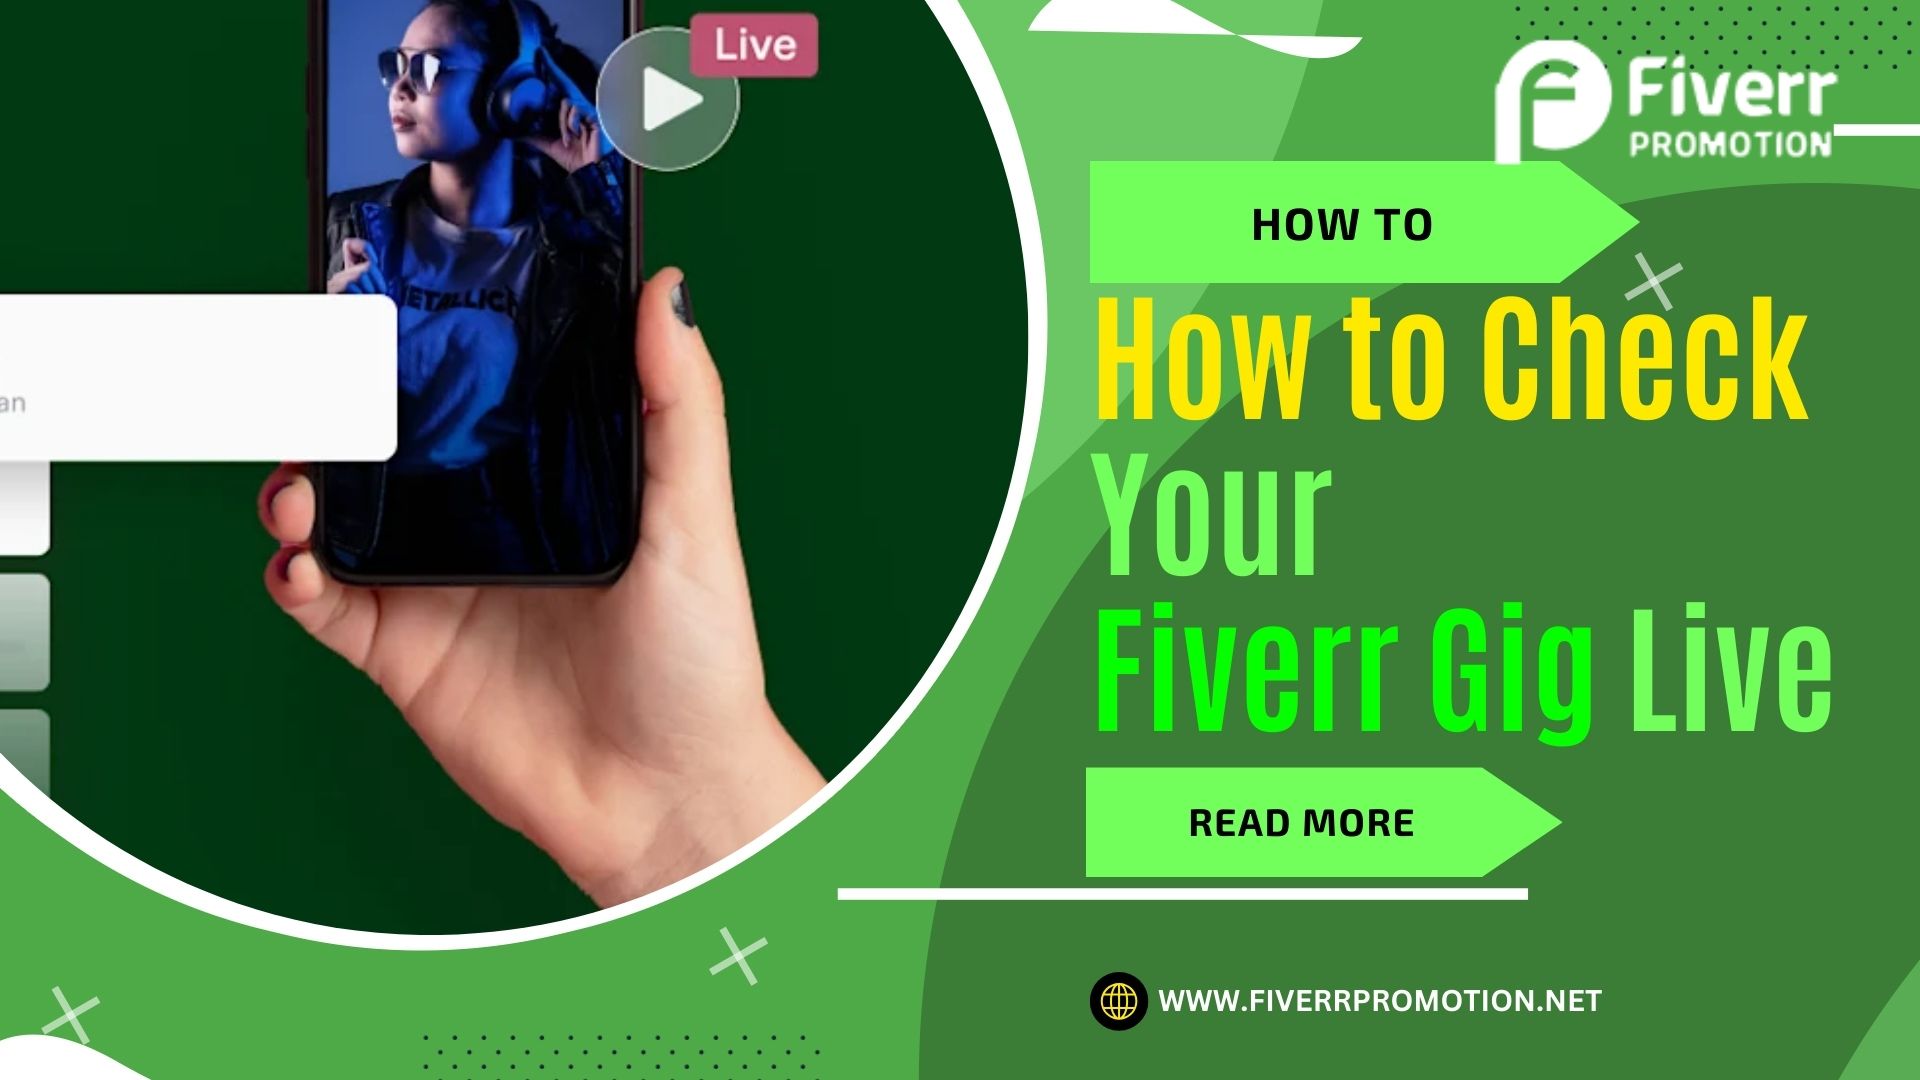 How to Check Your Fiverr Gig Live